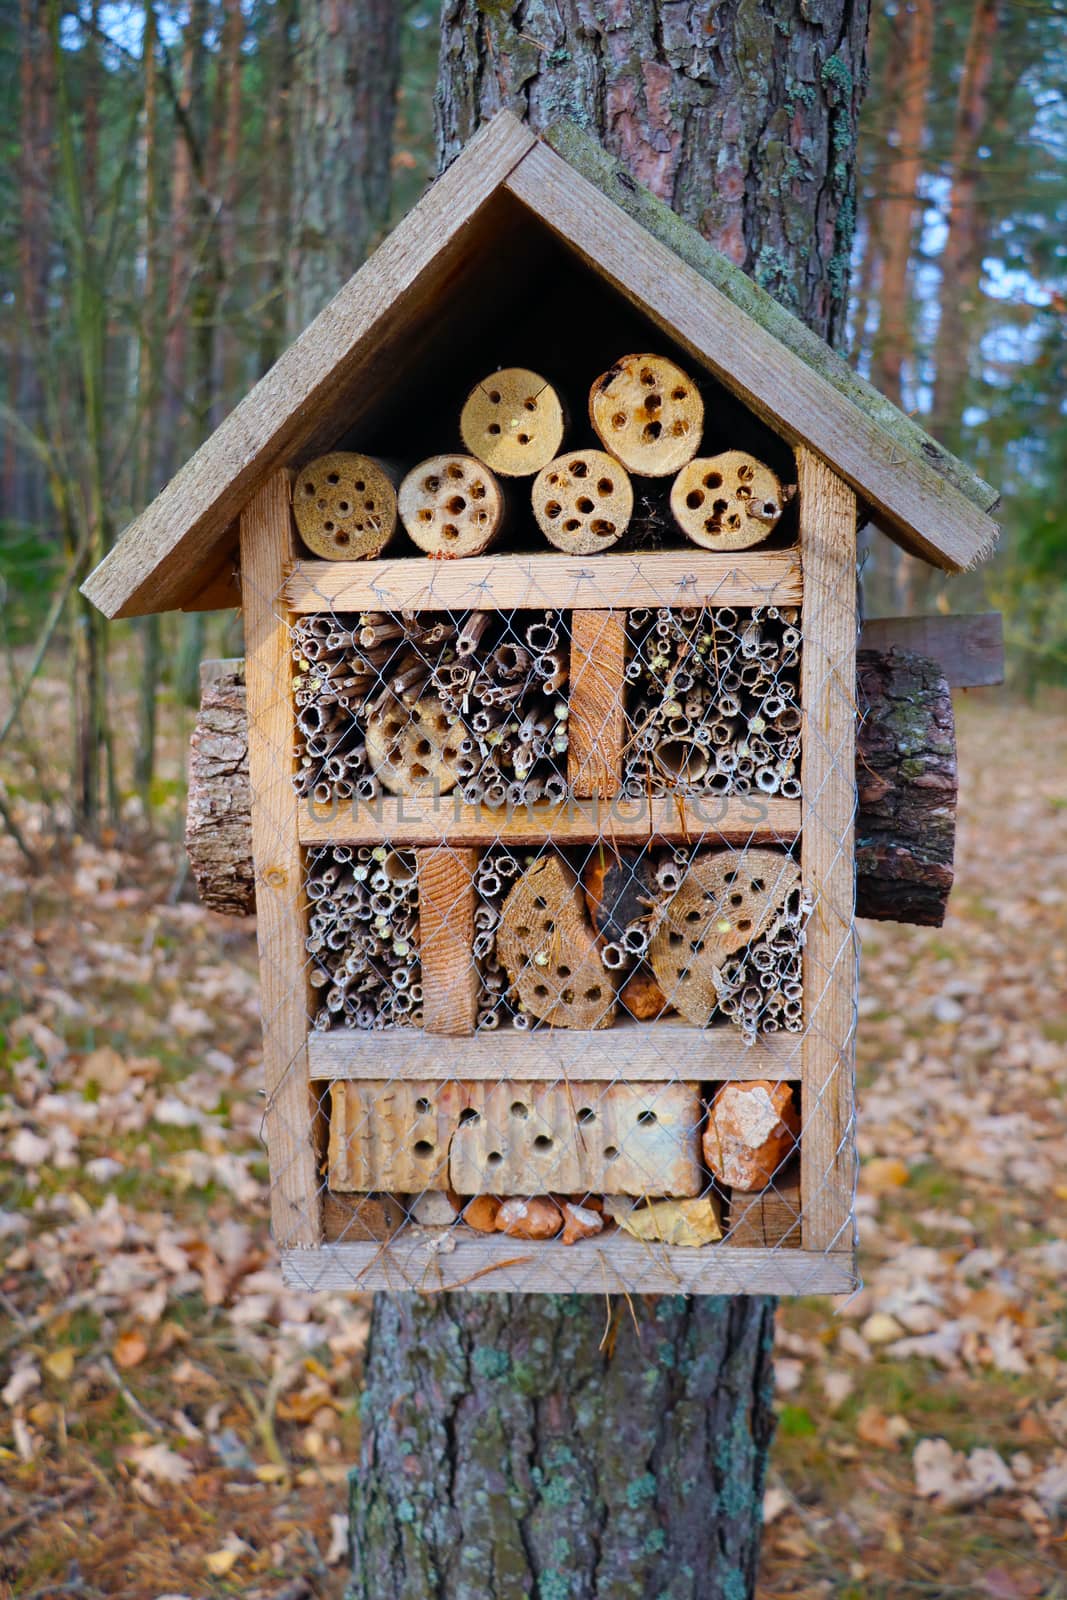 Small house for small insects before wintering